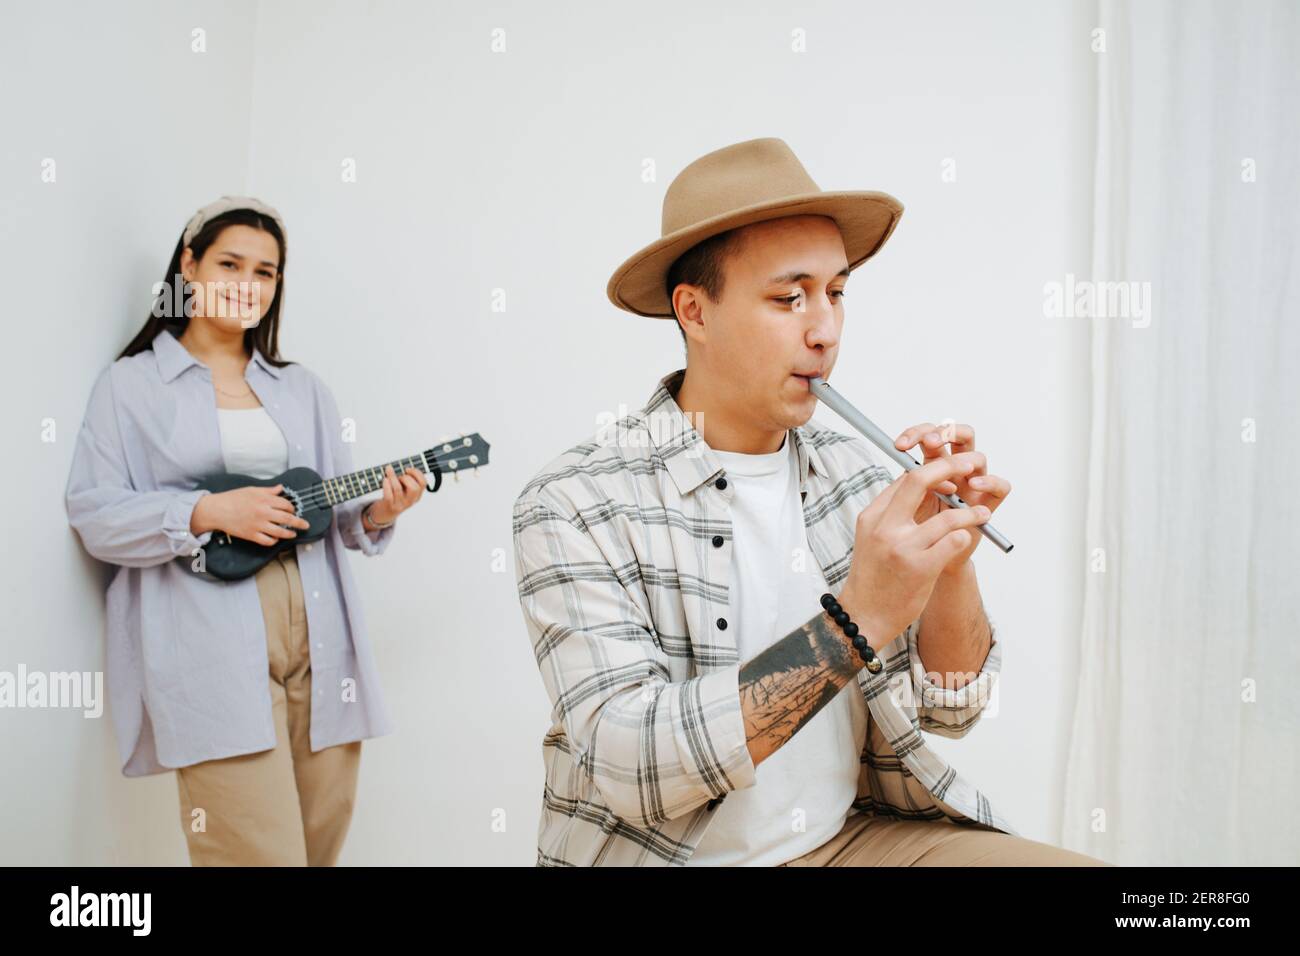 A man plays the Irish flute, and girl playing on a ukulele Stock Photo